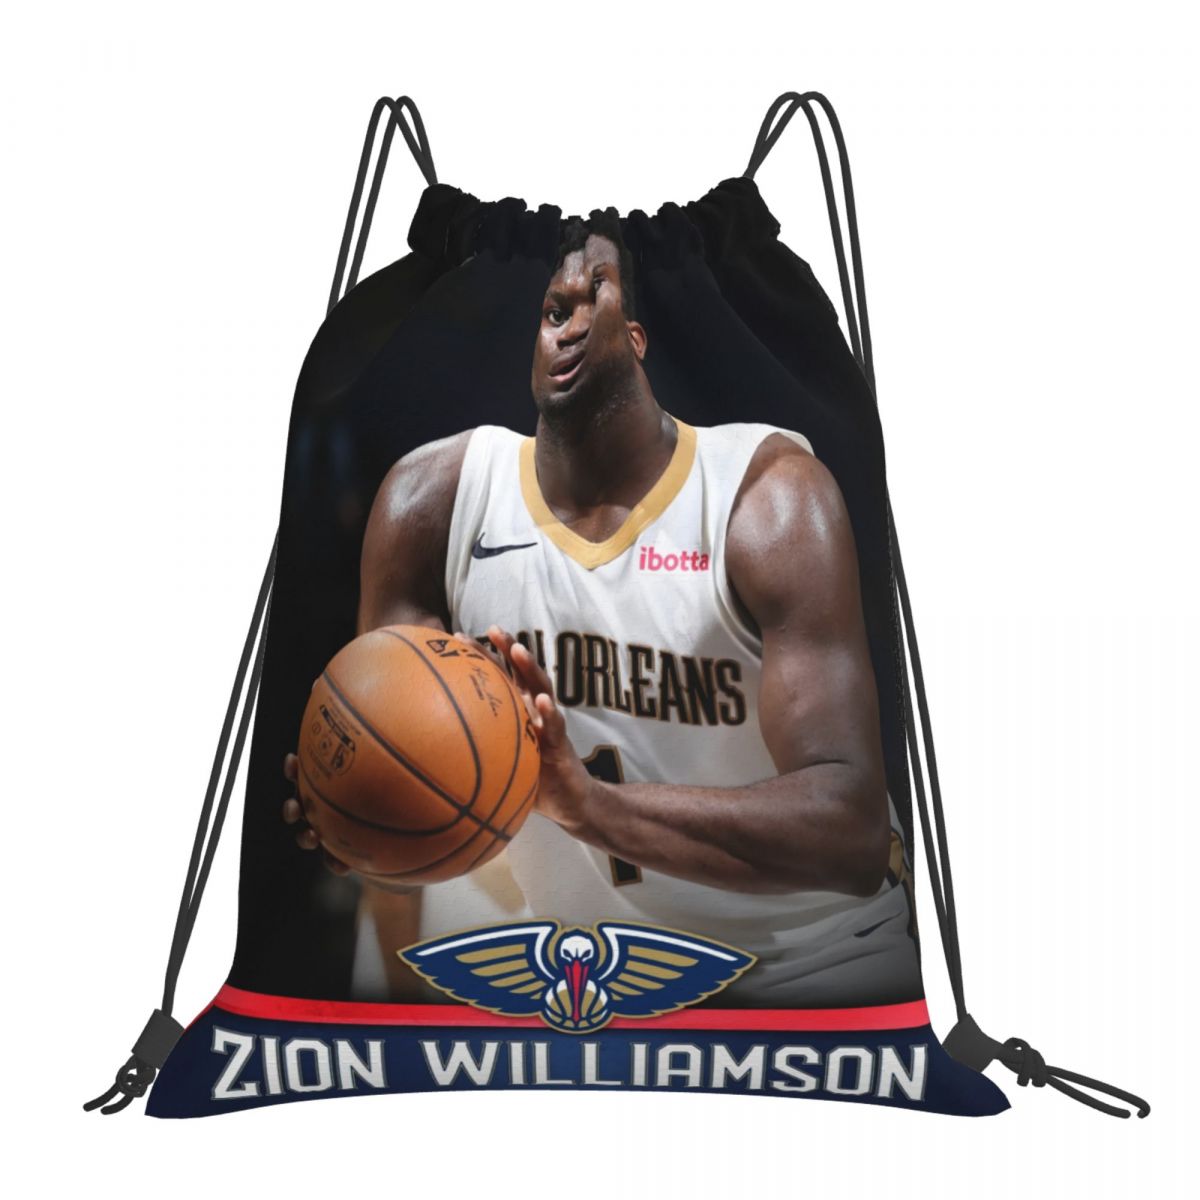 New Orleans Pelicans Zion Williamson 2021 Game Star Drawstring Bags for School Gym